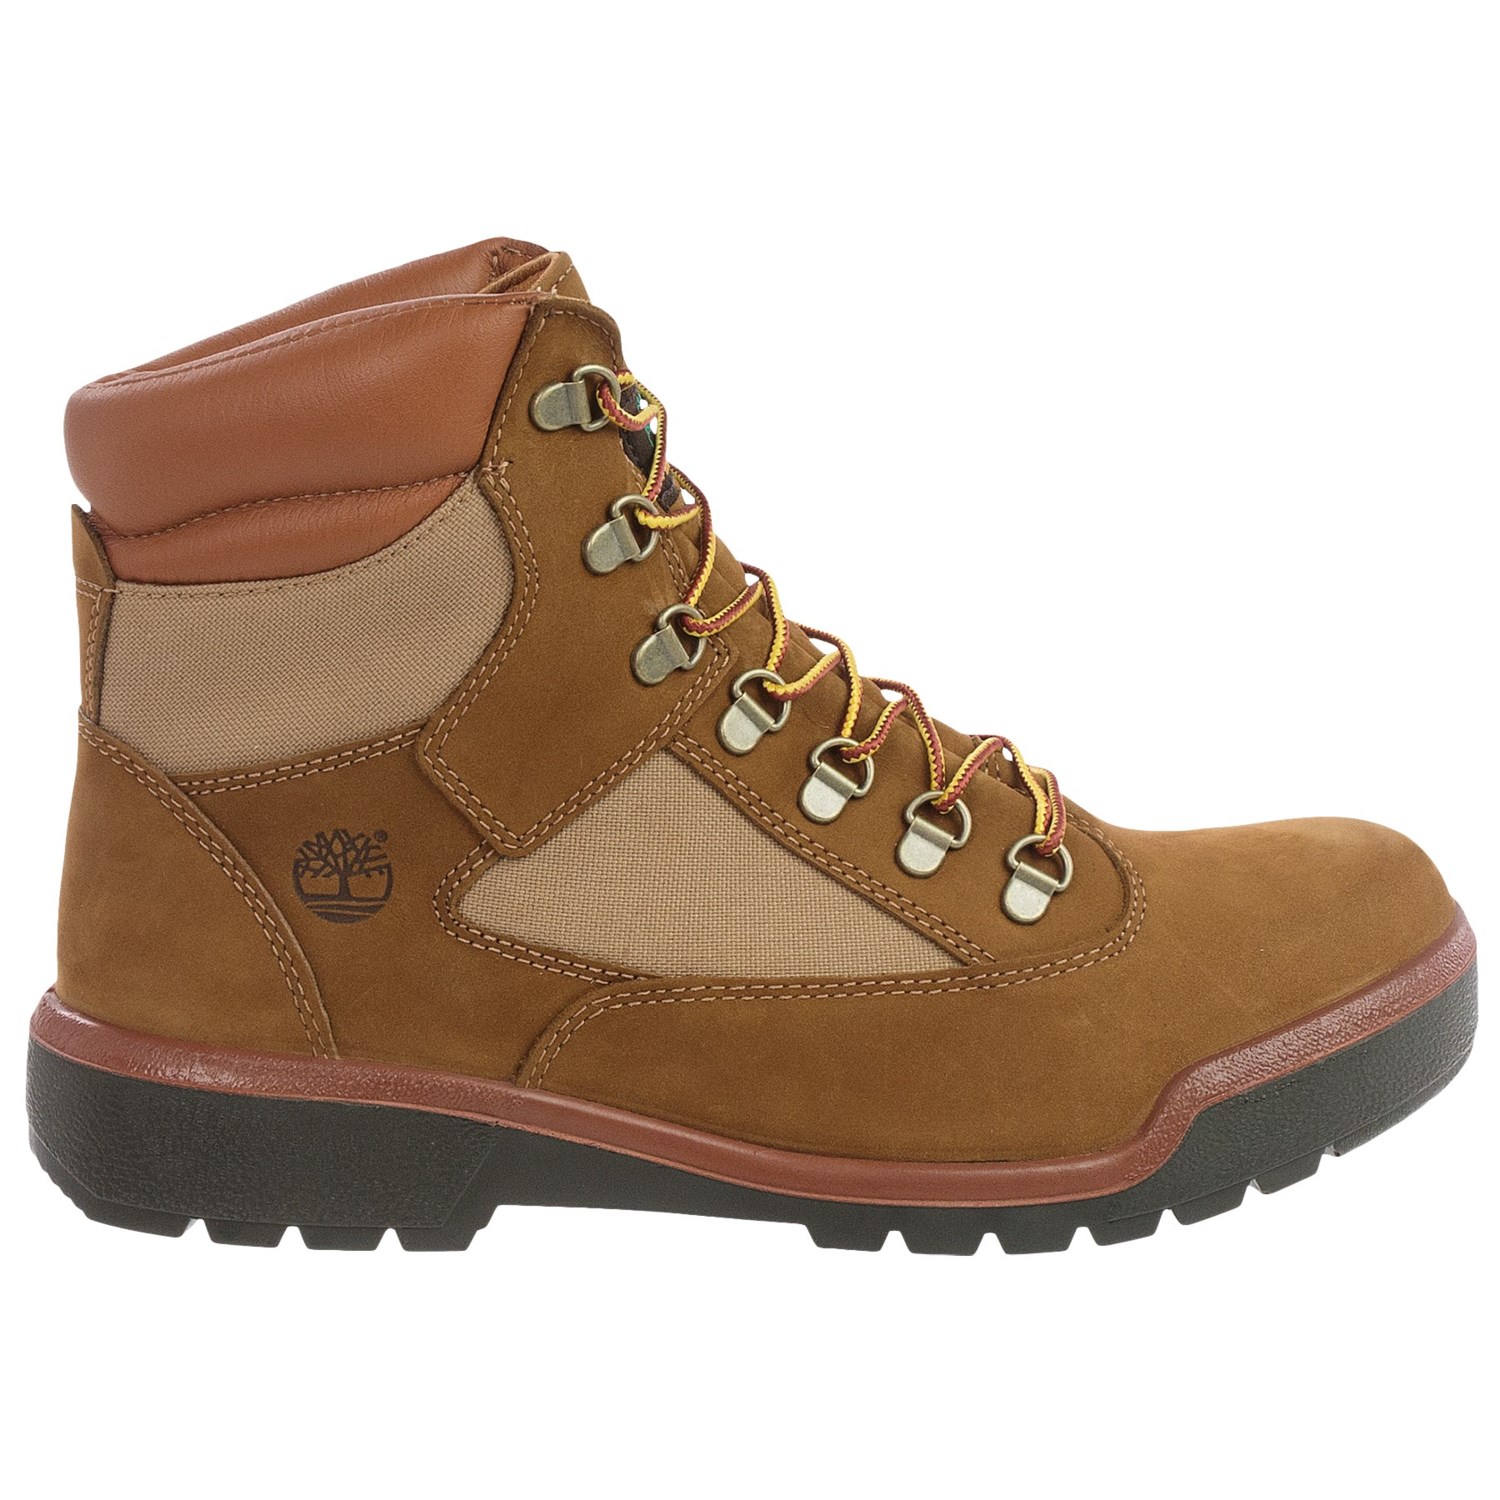 Timberland Nubuck Field Boots (For Men) - Save 41%